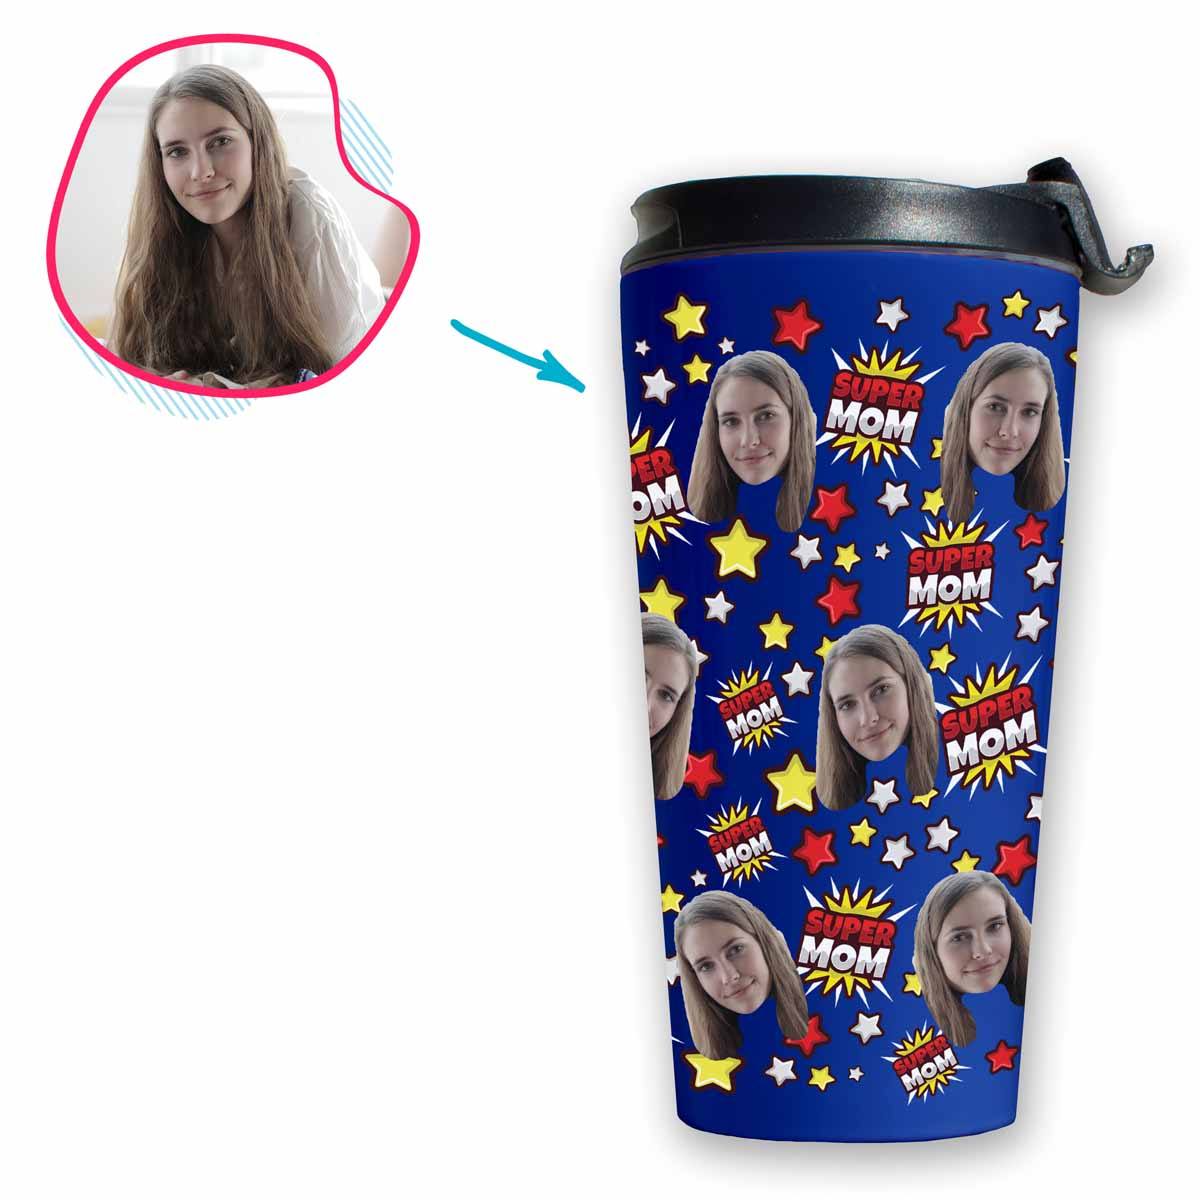 darkblue Super Mom travel mug personalized with photo of face printed on it